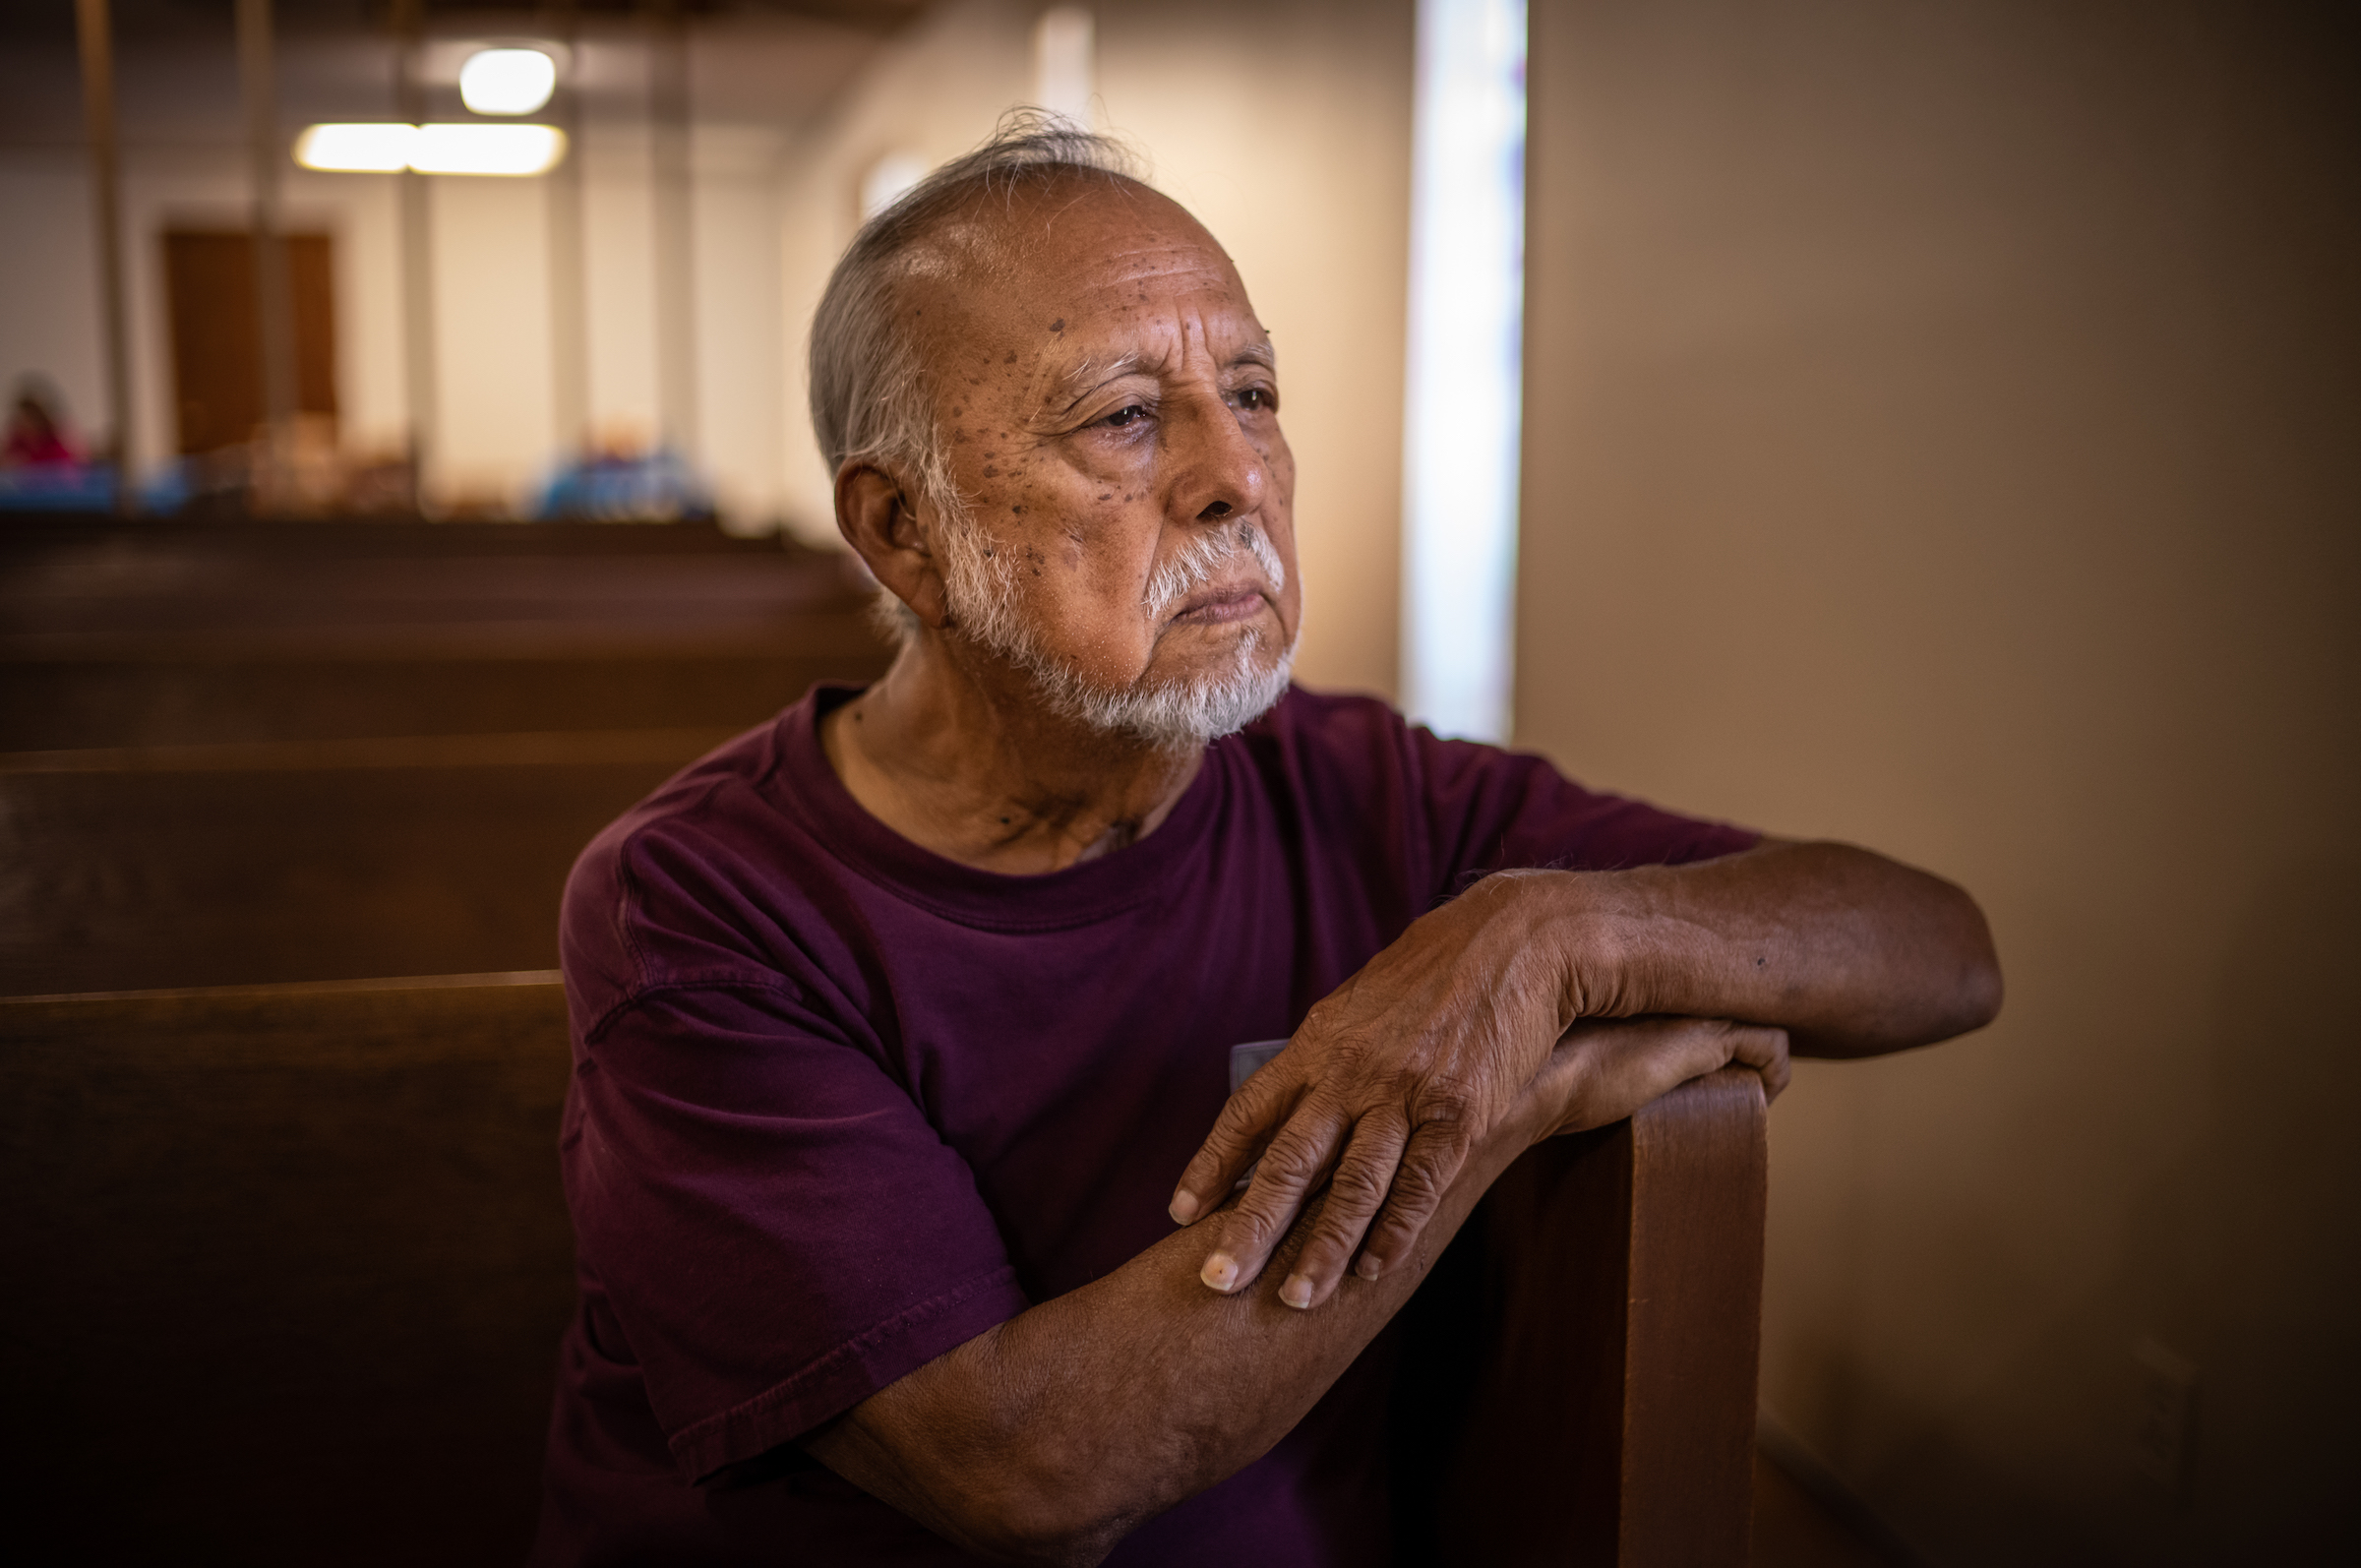 Julian Moreno, shown here in the Primera Iglesia Bautista church where he used to be a pastor, lost his great-granddaughter Lexi Rubio in the Robb Elementary School Shooting on Tuesday. (David Butow—Redux for TIME)